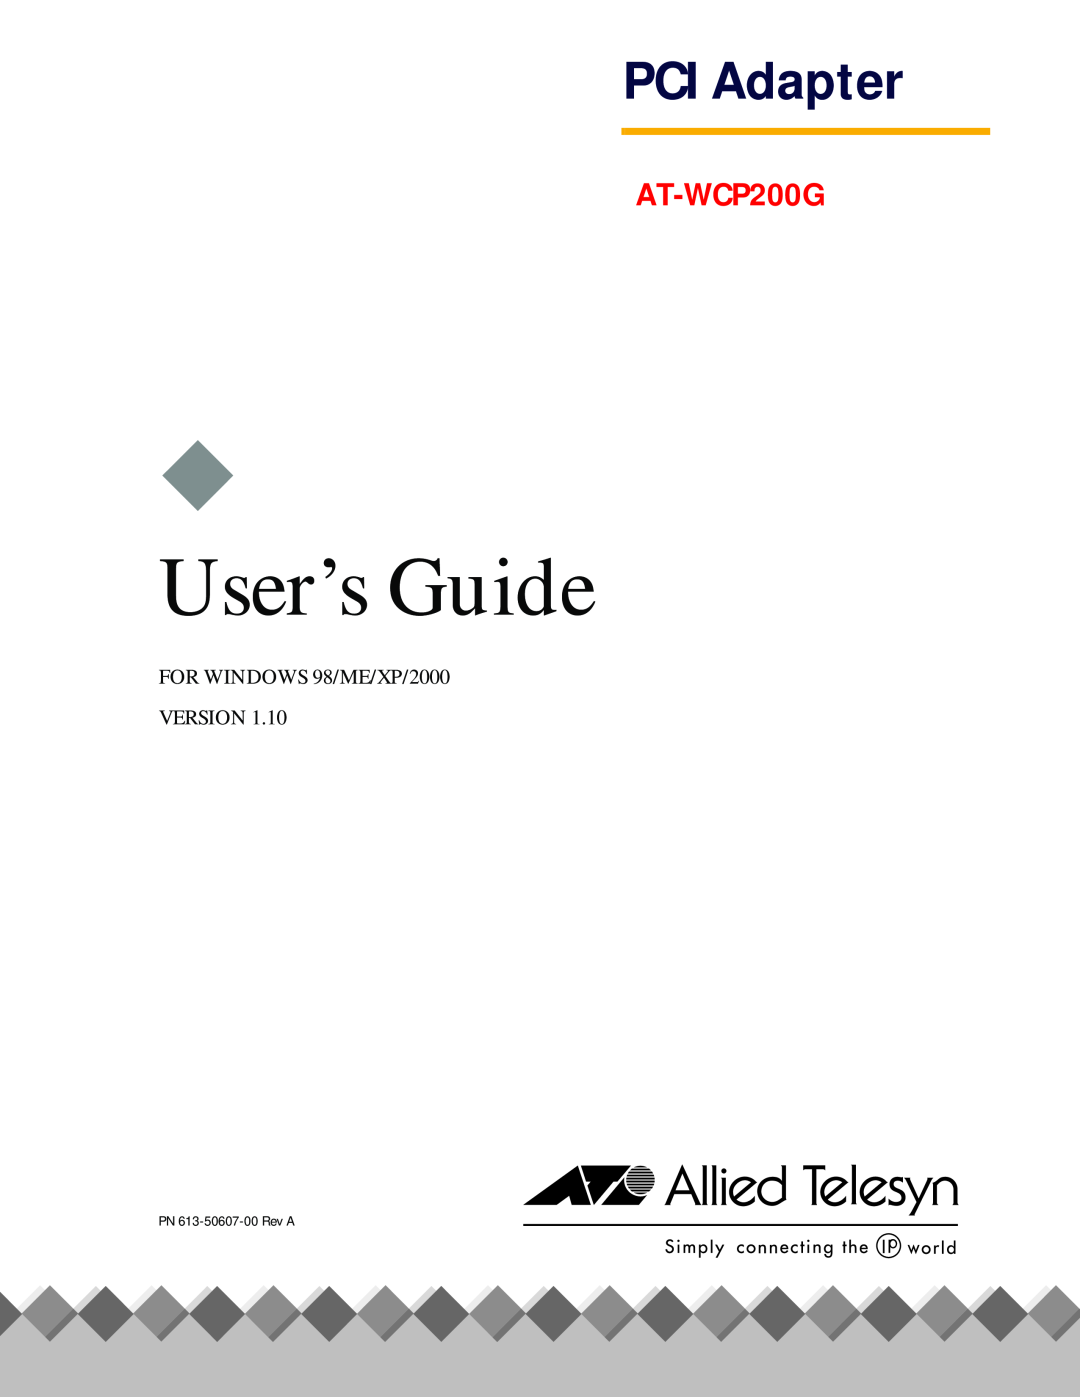 Allied Telesis AT-WCP200G manual User’s Guide, PCI Adapter, FOR WINDOWS 98/ME/XP/2000 VERSION, PN 613-50607-00 Rev A 